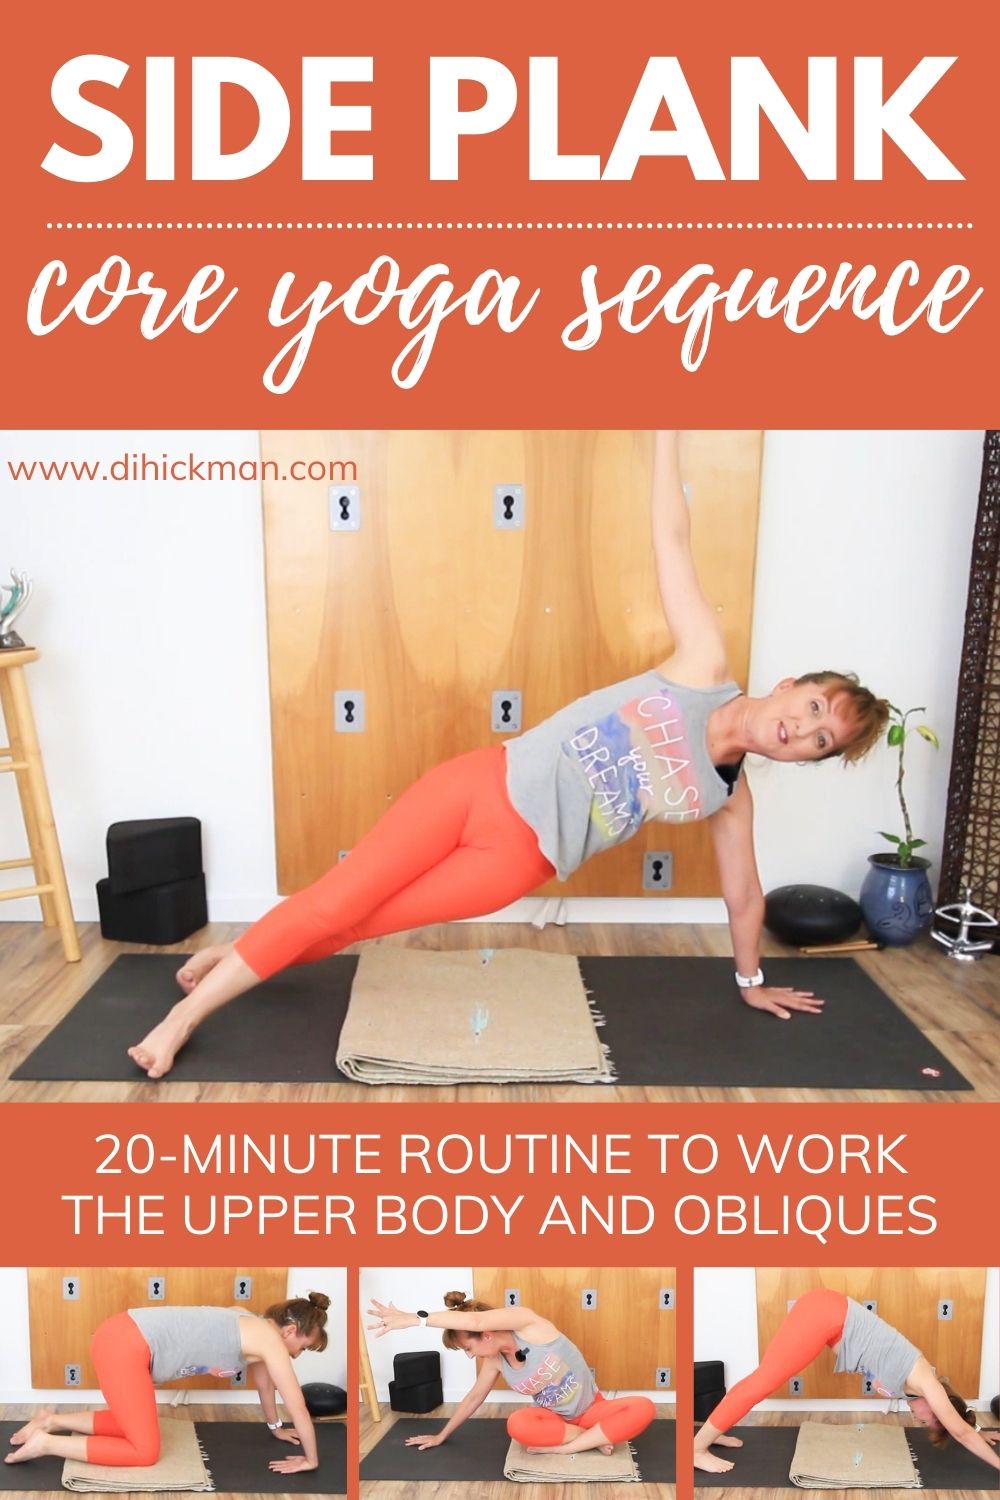 Side plank core yoga sequence